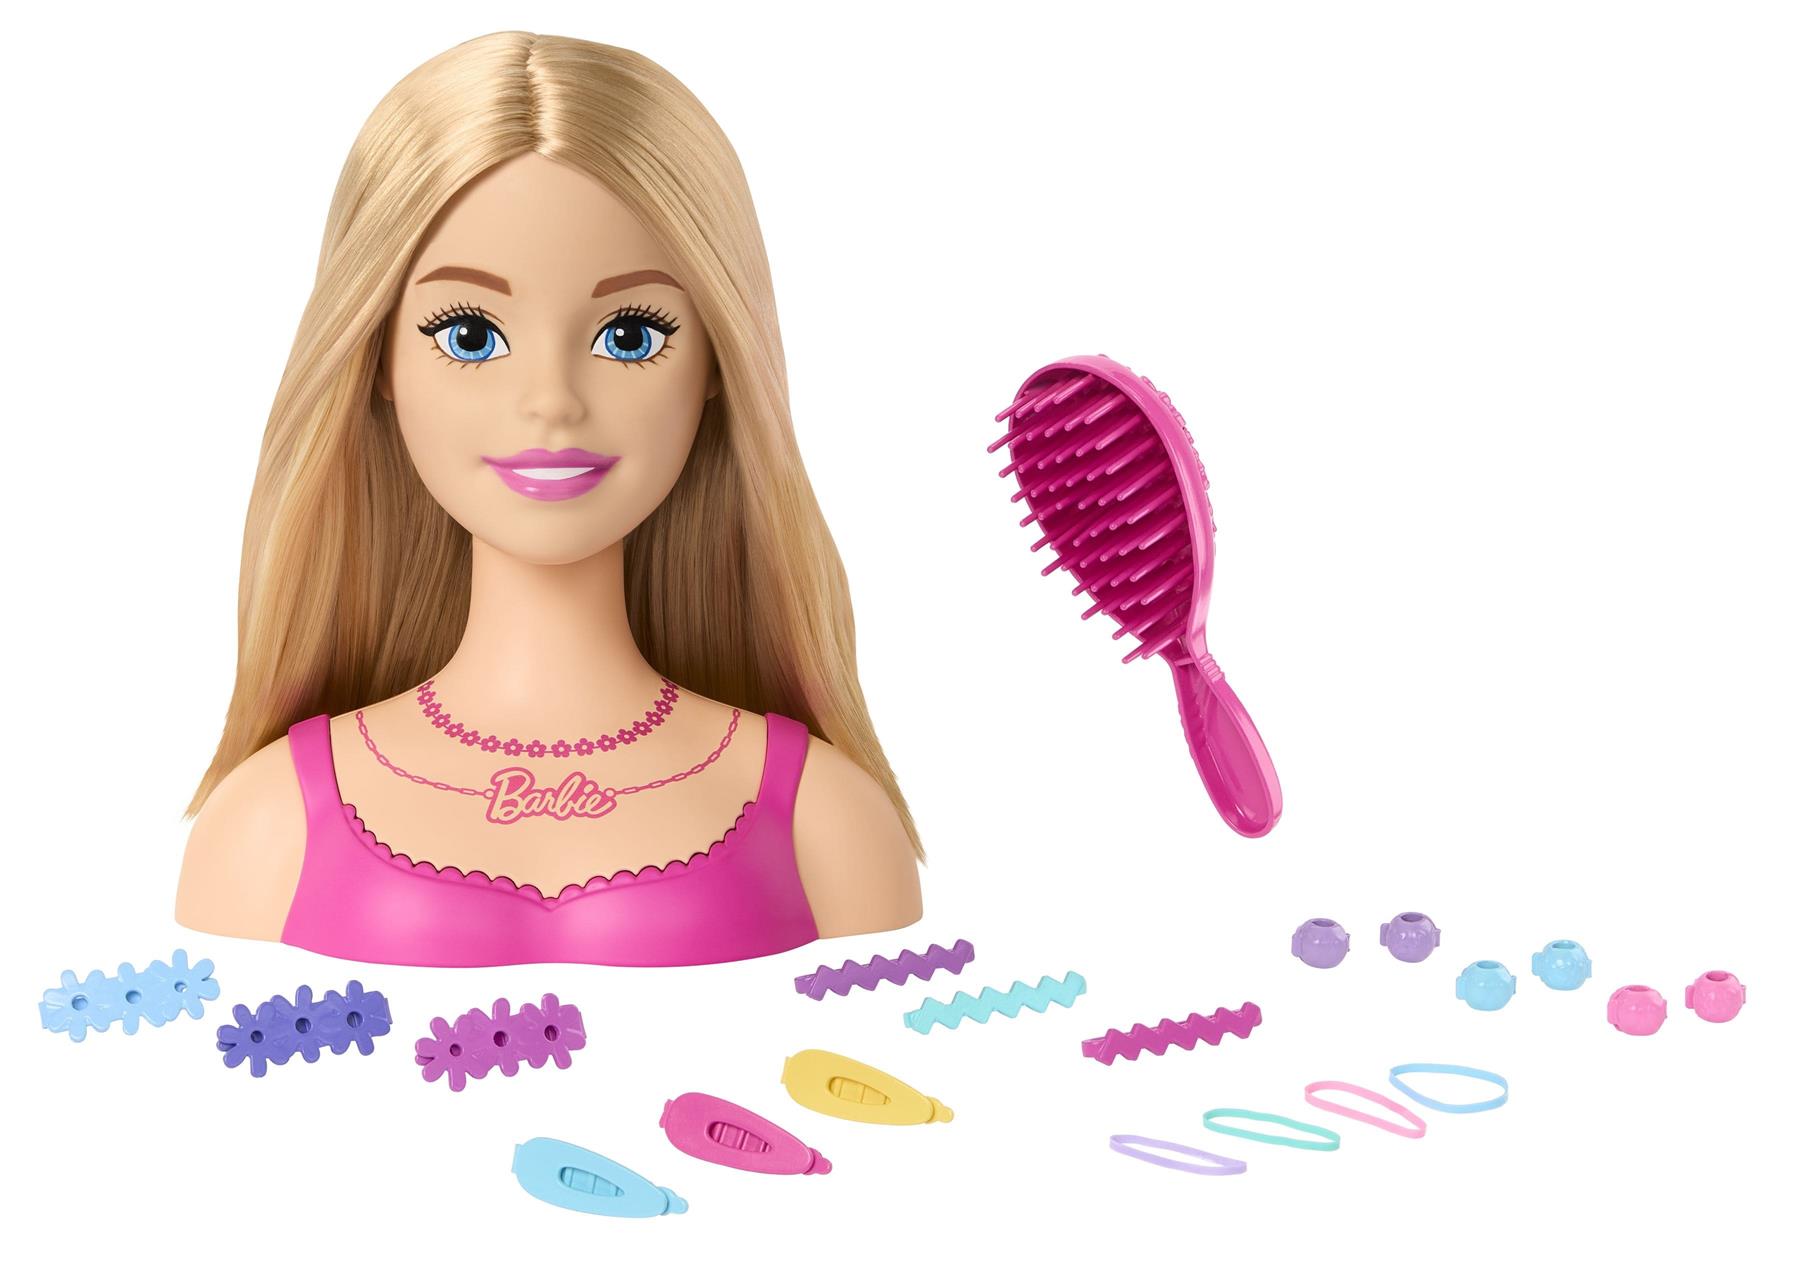 Barbie Styling Head and Accessories